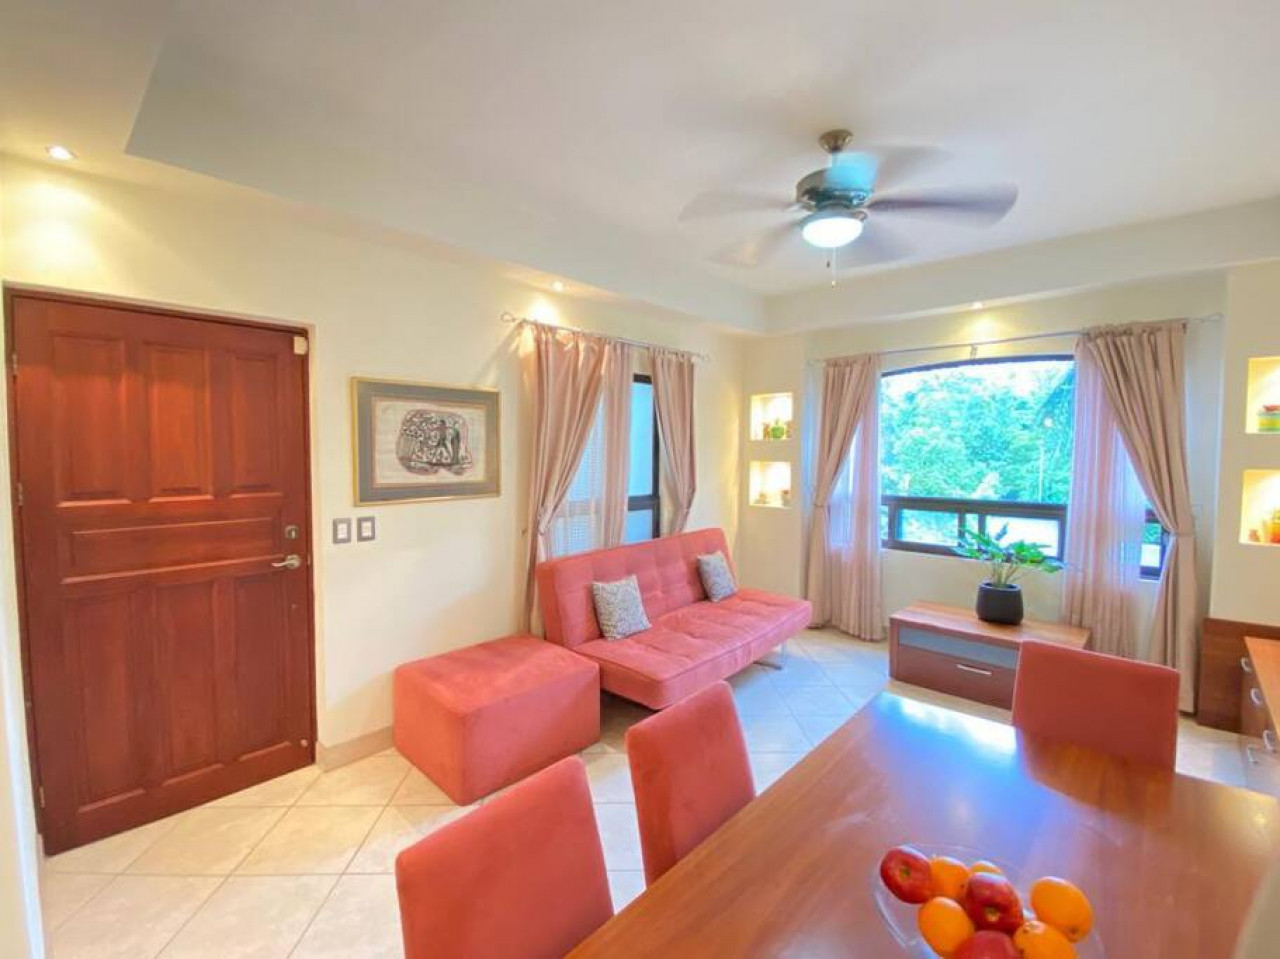 Property Image 2 - Perfect 2 bedroom condo by pool. Great price!